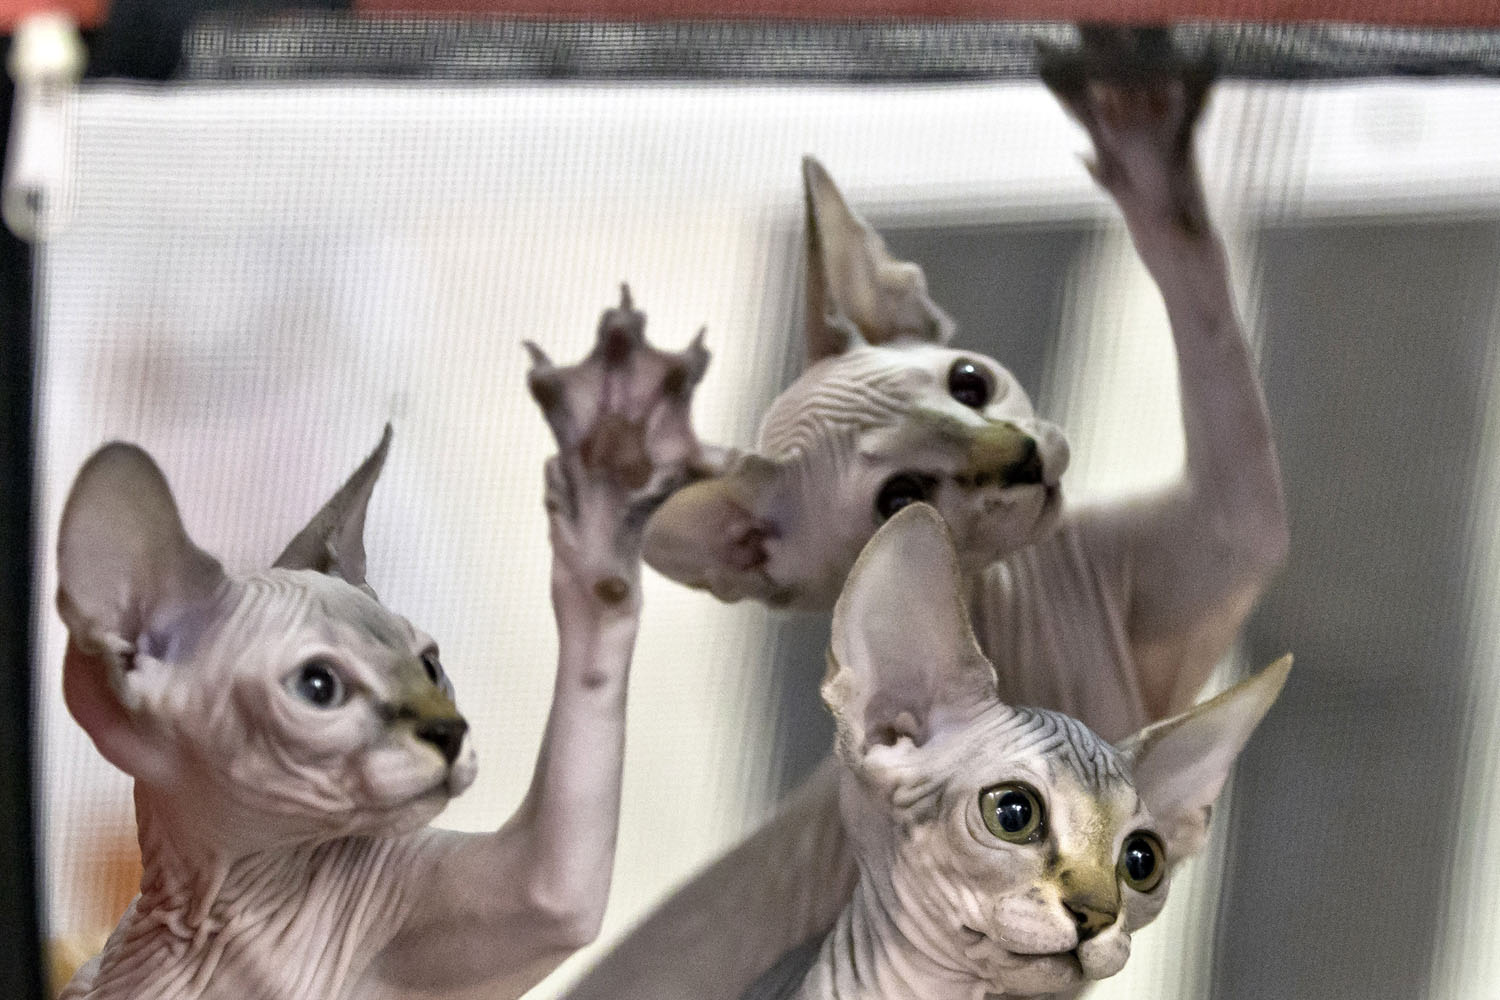 Sept. 28, 2013. Sphynx kittens reach for a referee's toy while being evaluated during an international feline beauty show in Bucharest, Romania.